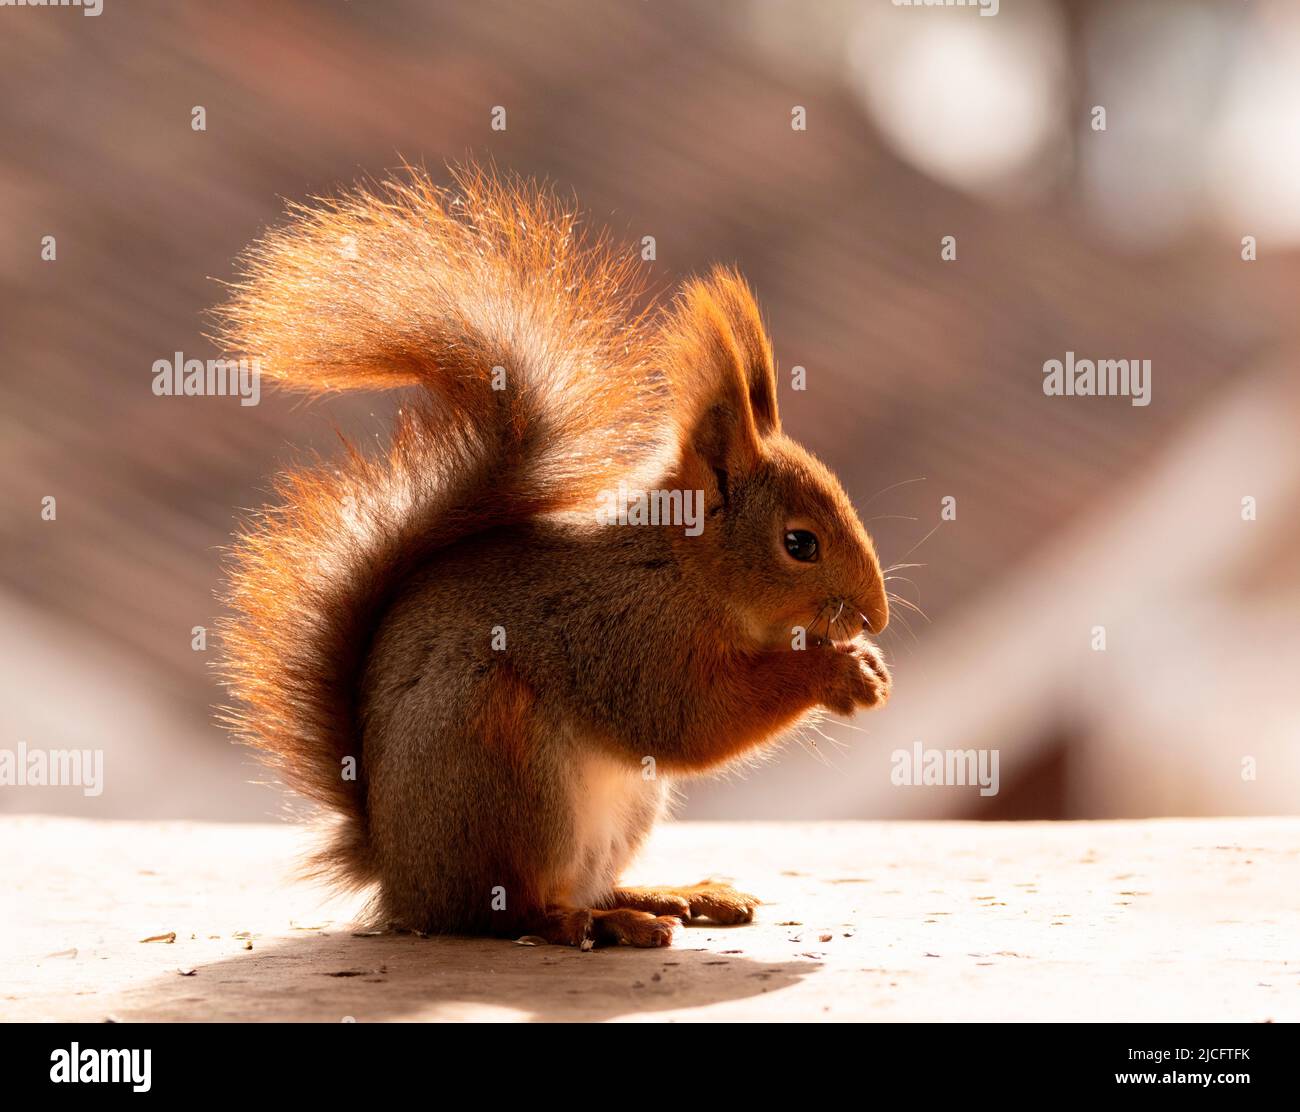 red squirrel stand on the ground Stock Photo